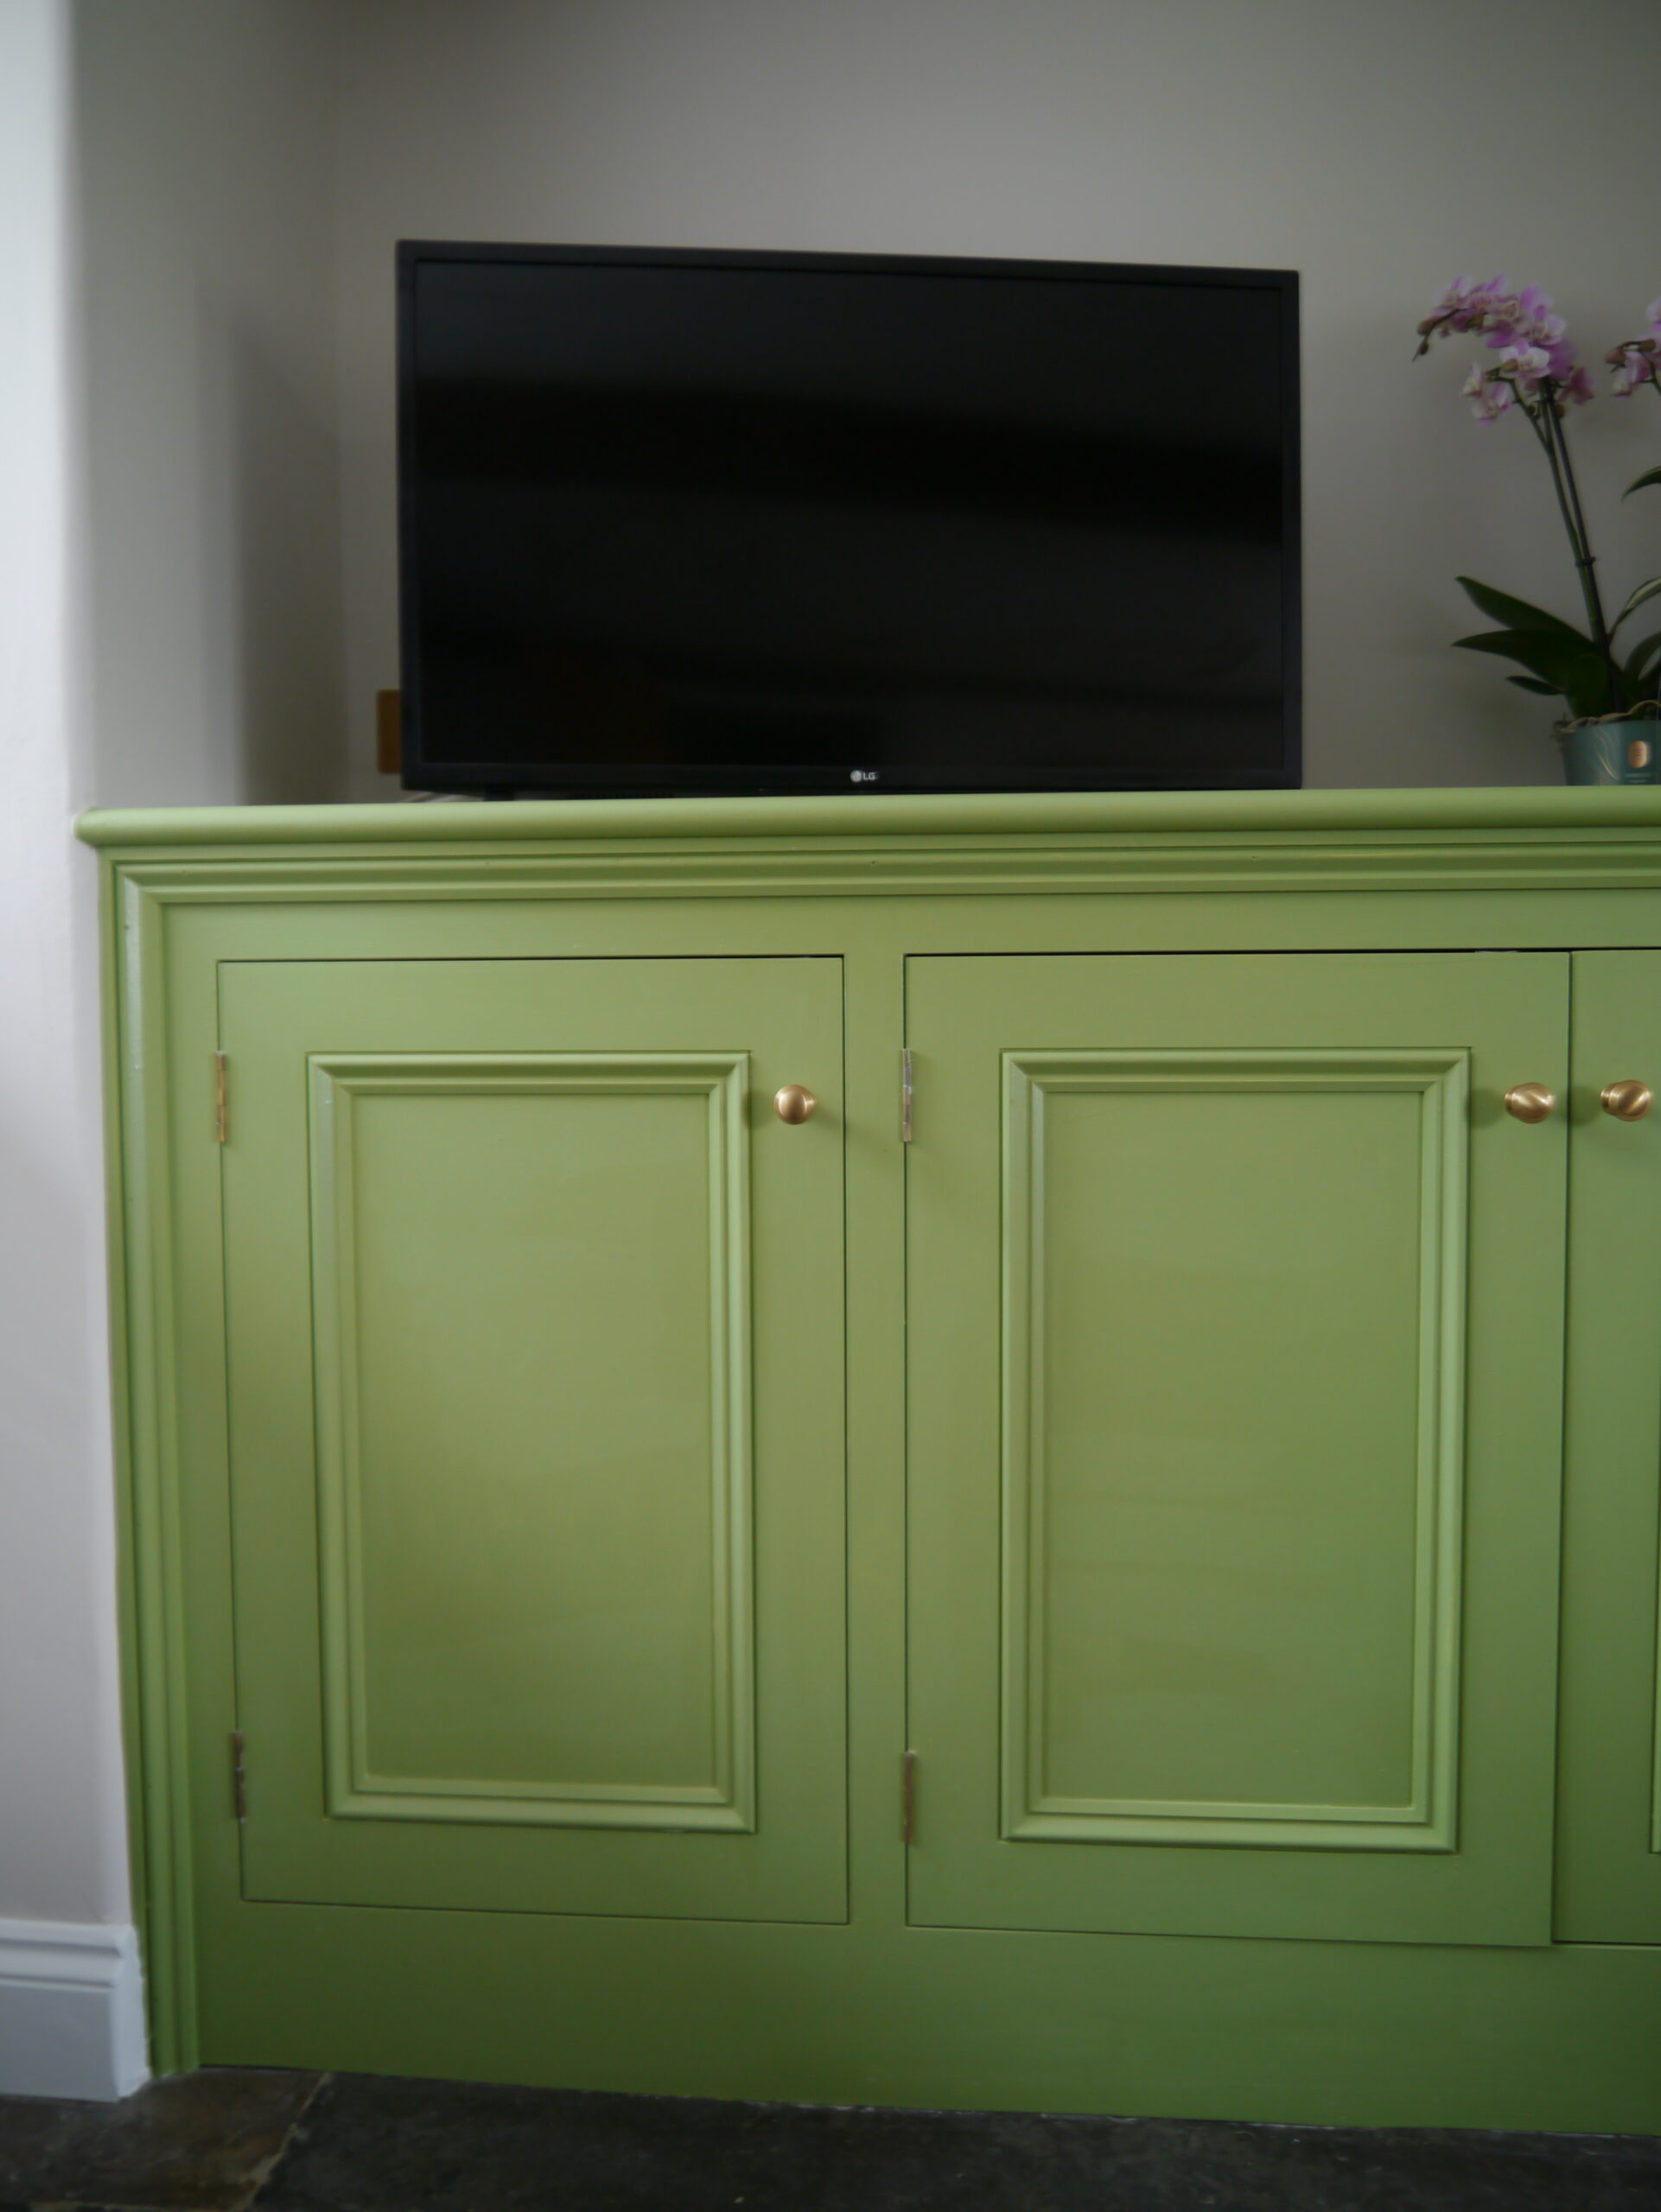 Bespoke green timber TV unit by Kings Stag Joinery